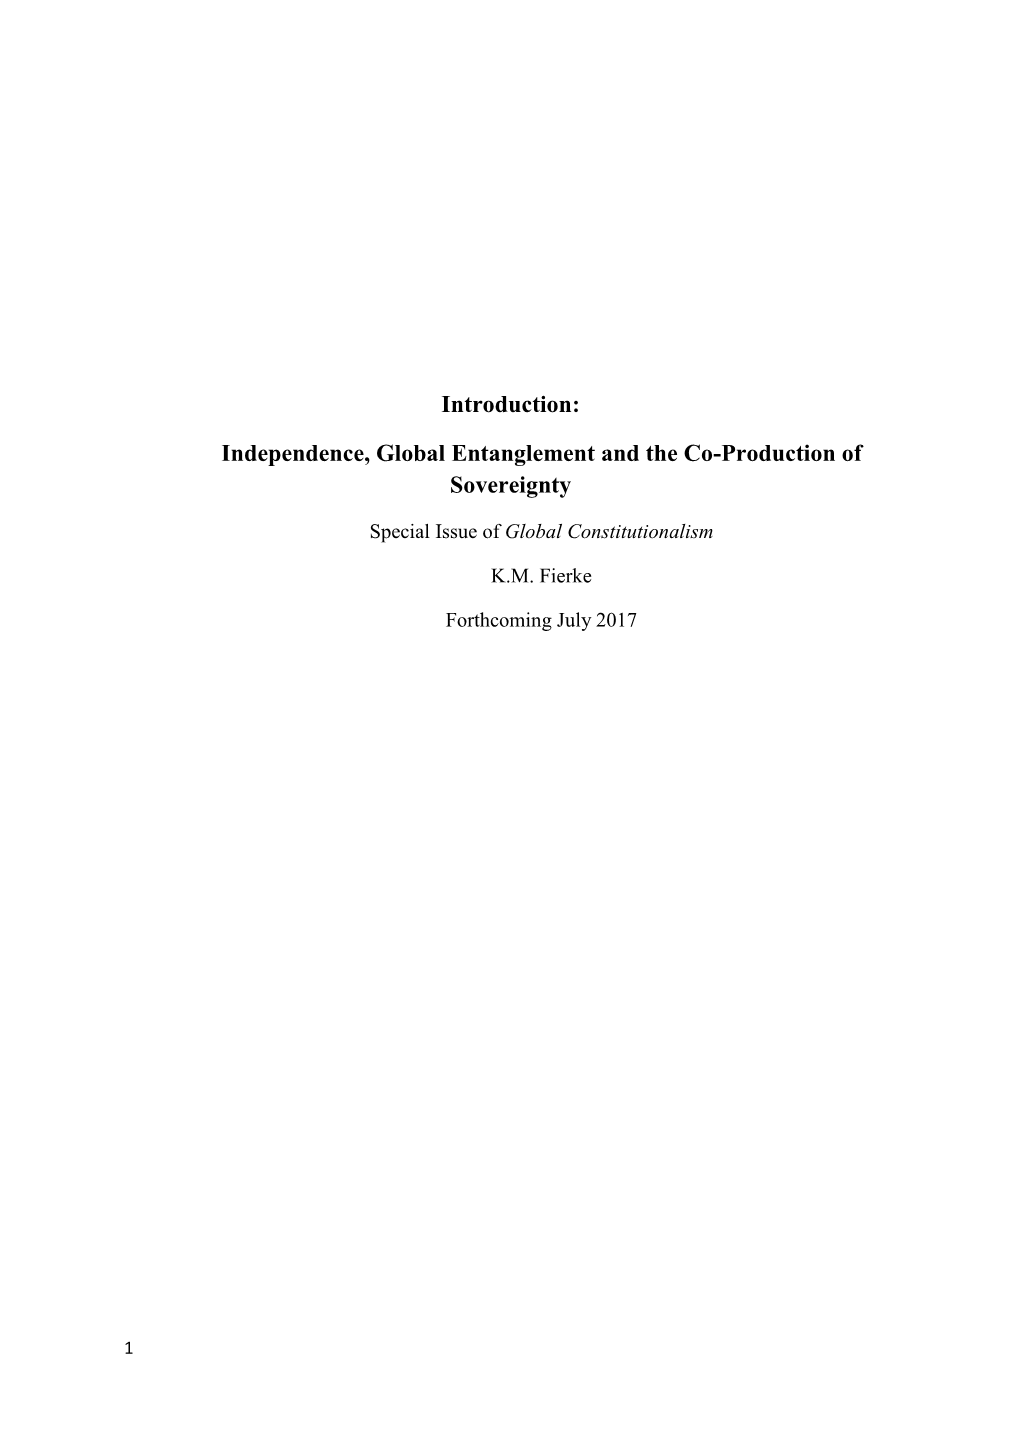 Introduction: Independence, Global Entanglement and the Co